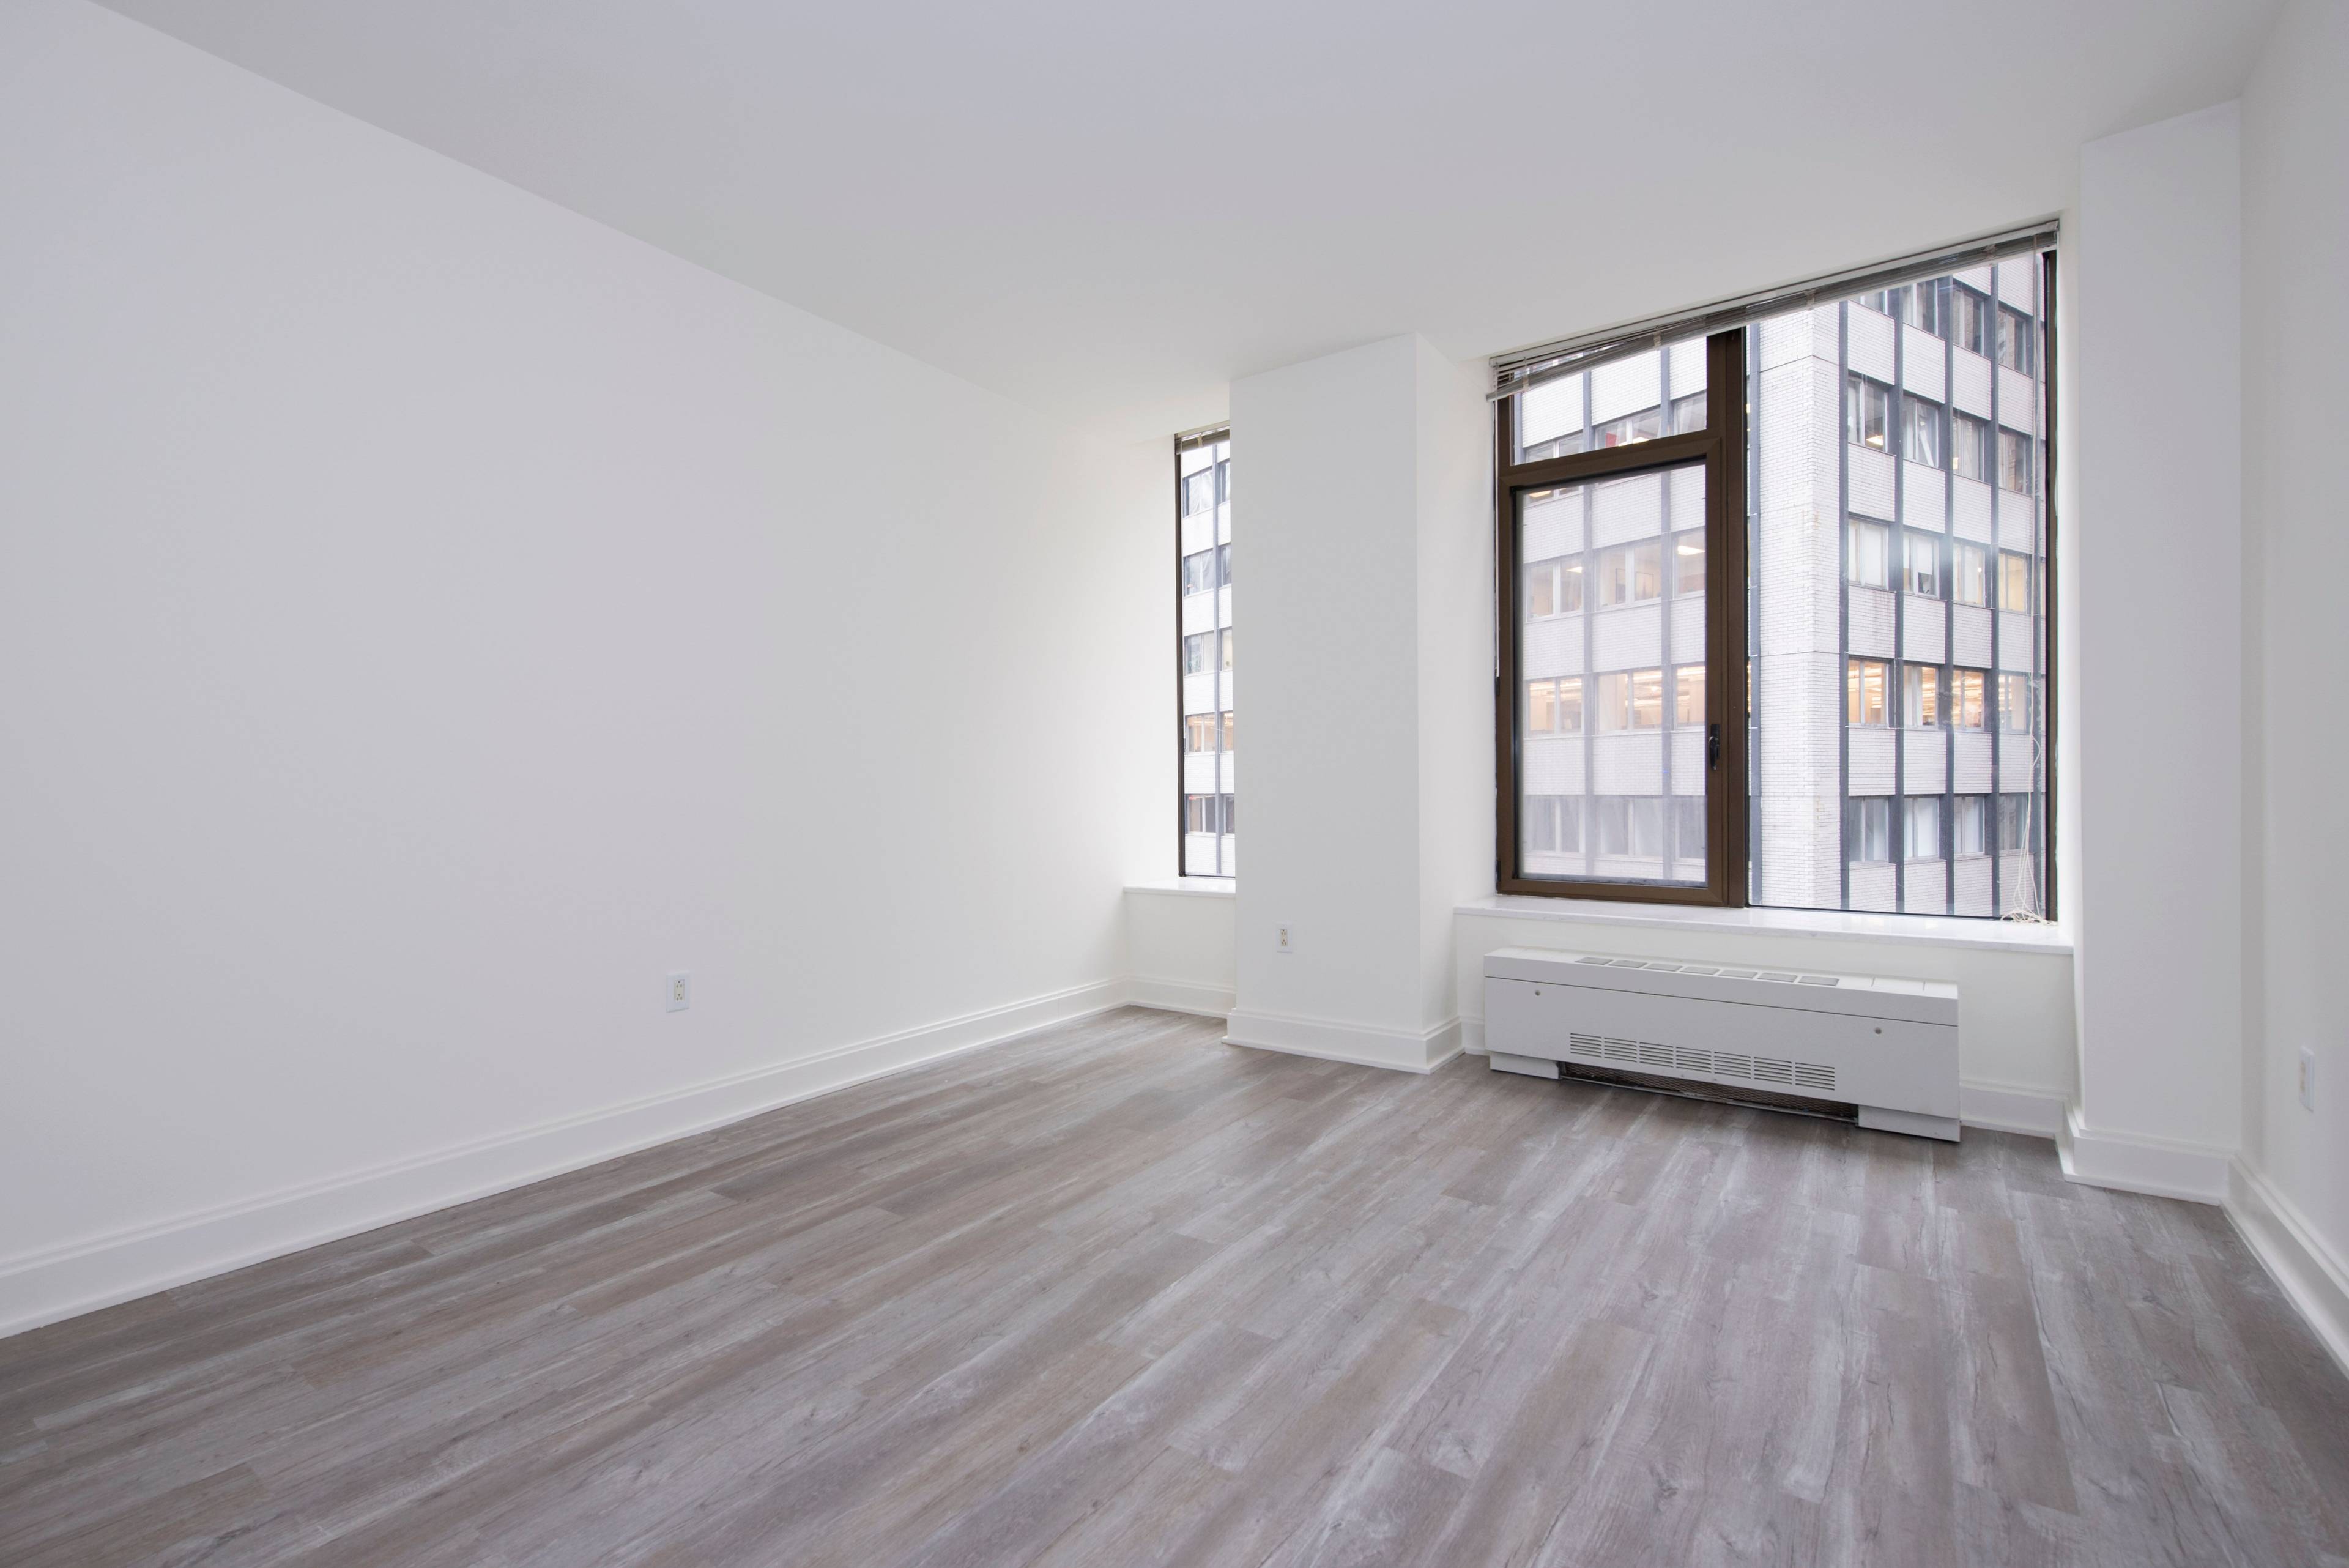 BEAUTIFUL ALCOVE STUDIO FULL OF AMENITIES IN IDEAL FINANCIAL DISTRICT LOCATION